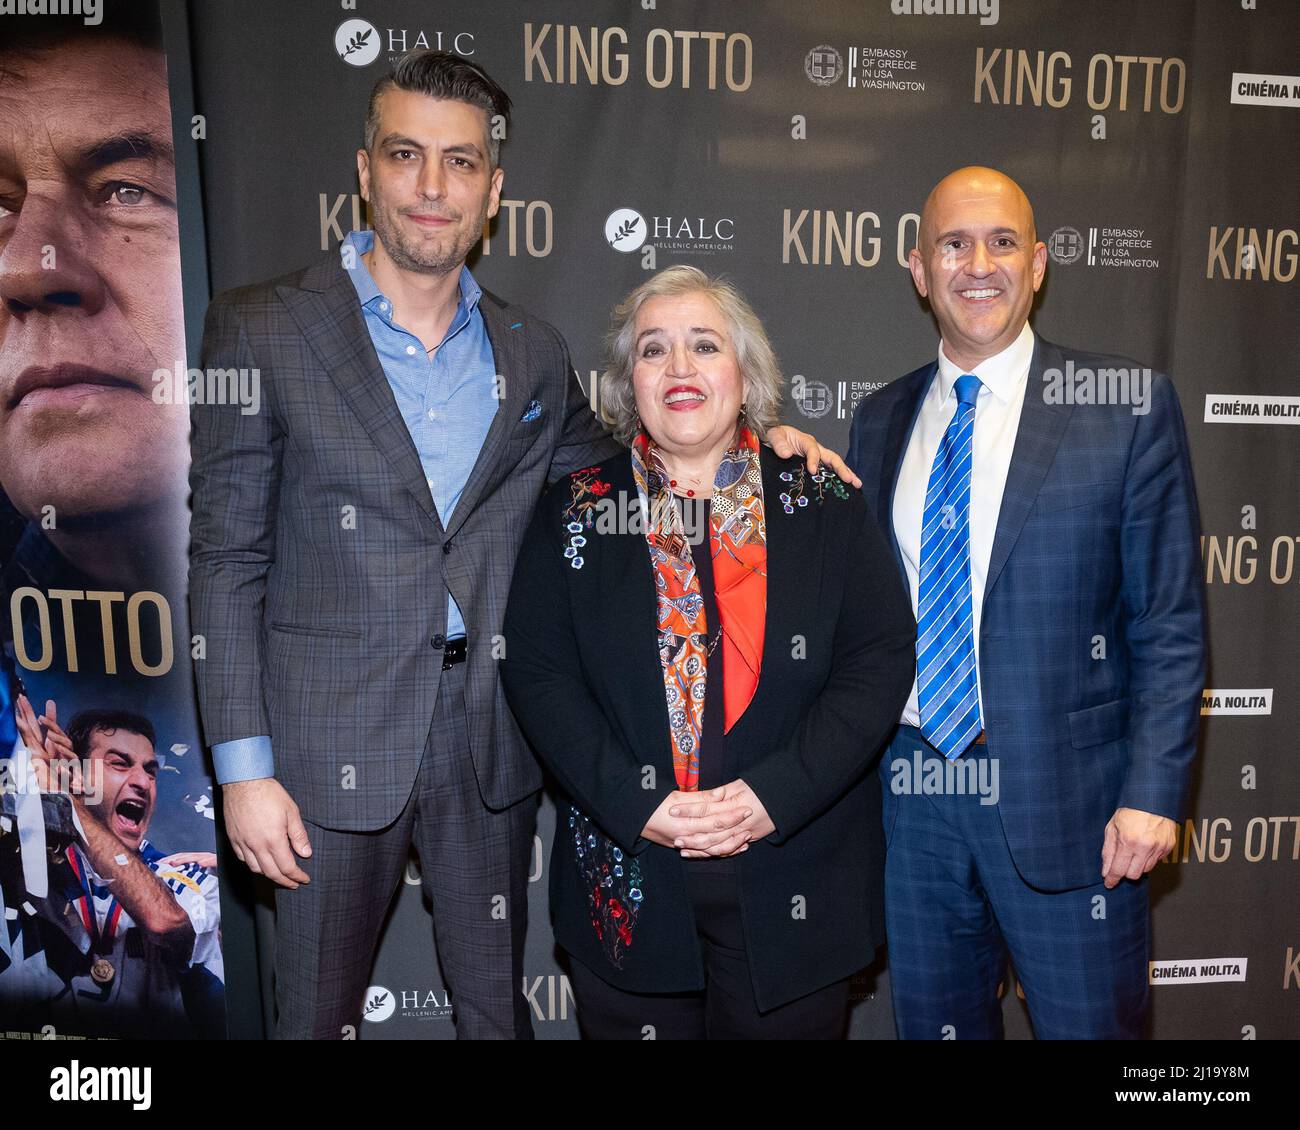 New York, USA. 23rd Mar, 2022. (L-R) Taso Pardalis, Ambassador of Greece to the U.S.A. Alexandra Papadopoulou, and Endy Zemenides attend the premiere of “King Otto” at the Museum of Modern Art in New York, New York, on Mar. 23, 2022. (Photo by Gabriele Holtermann/Sipa USA) Credit: Sipa USA/Alamy Live News Stock Photo